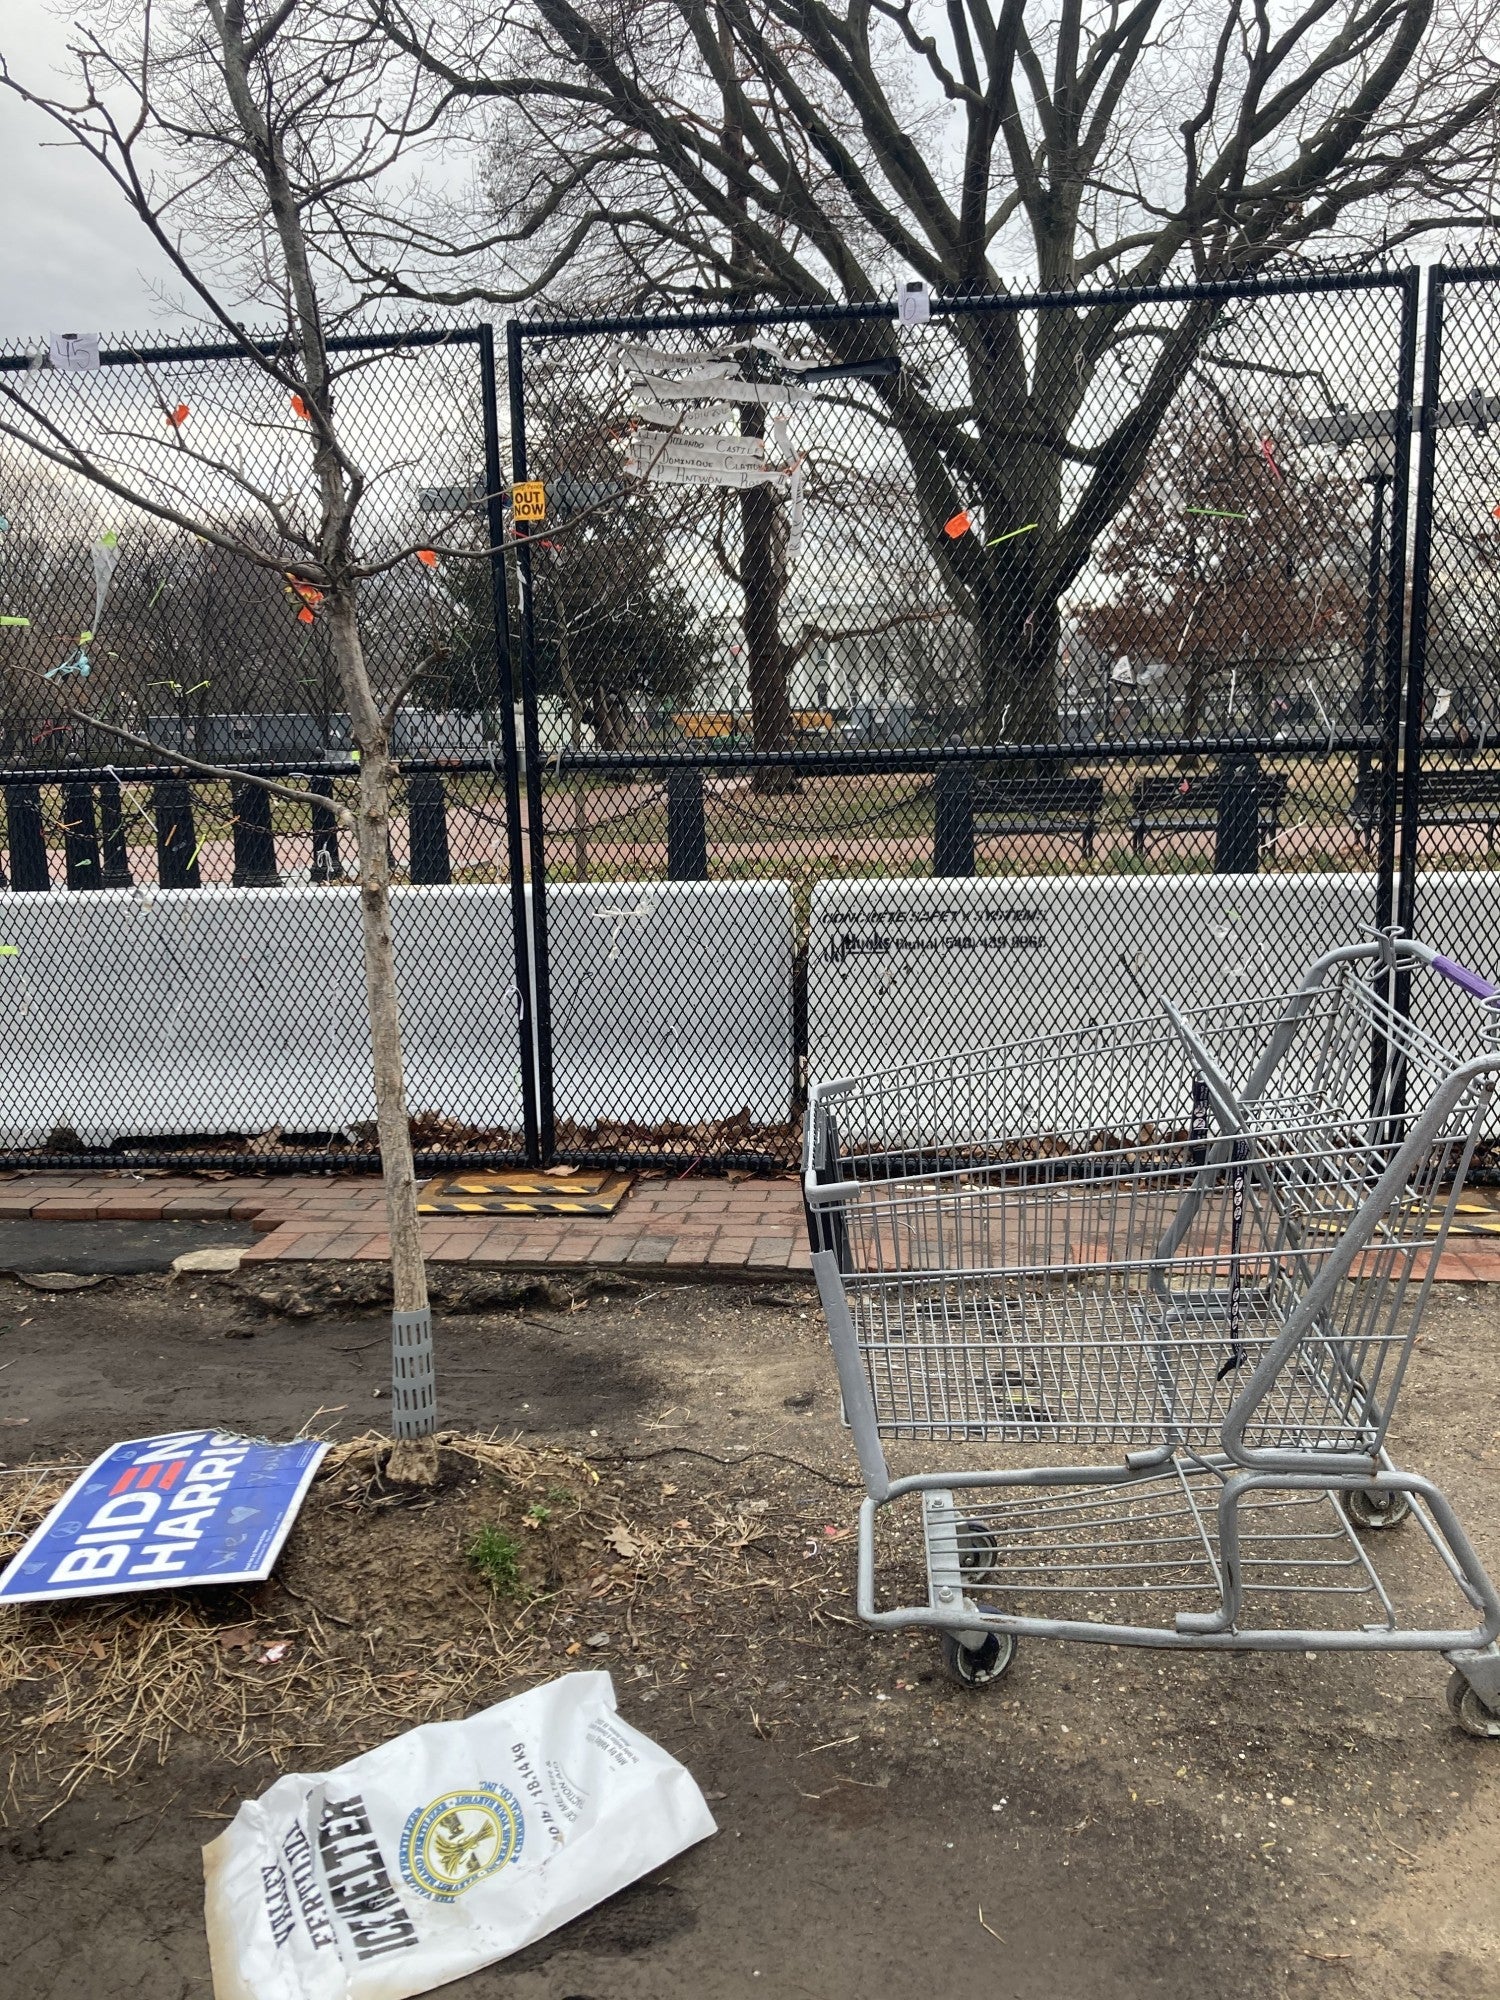 PICTURE ESSAY: Washington DC Is Now a Complete Hate-Filled Cesspool